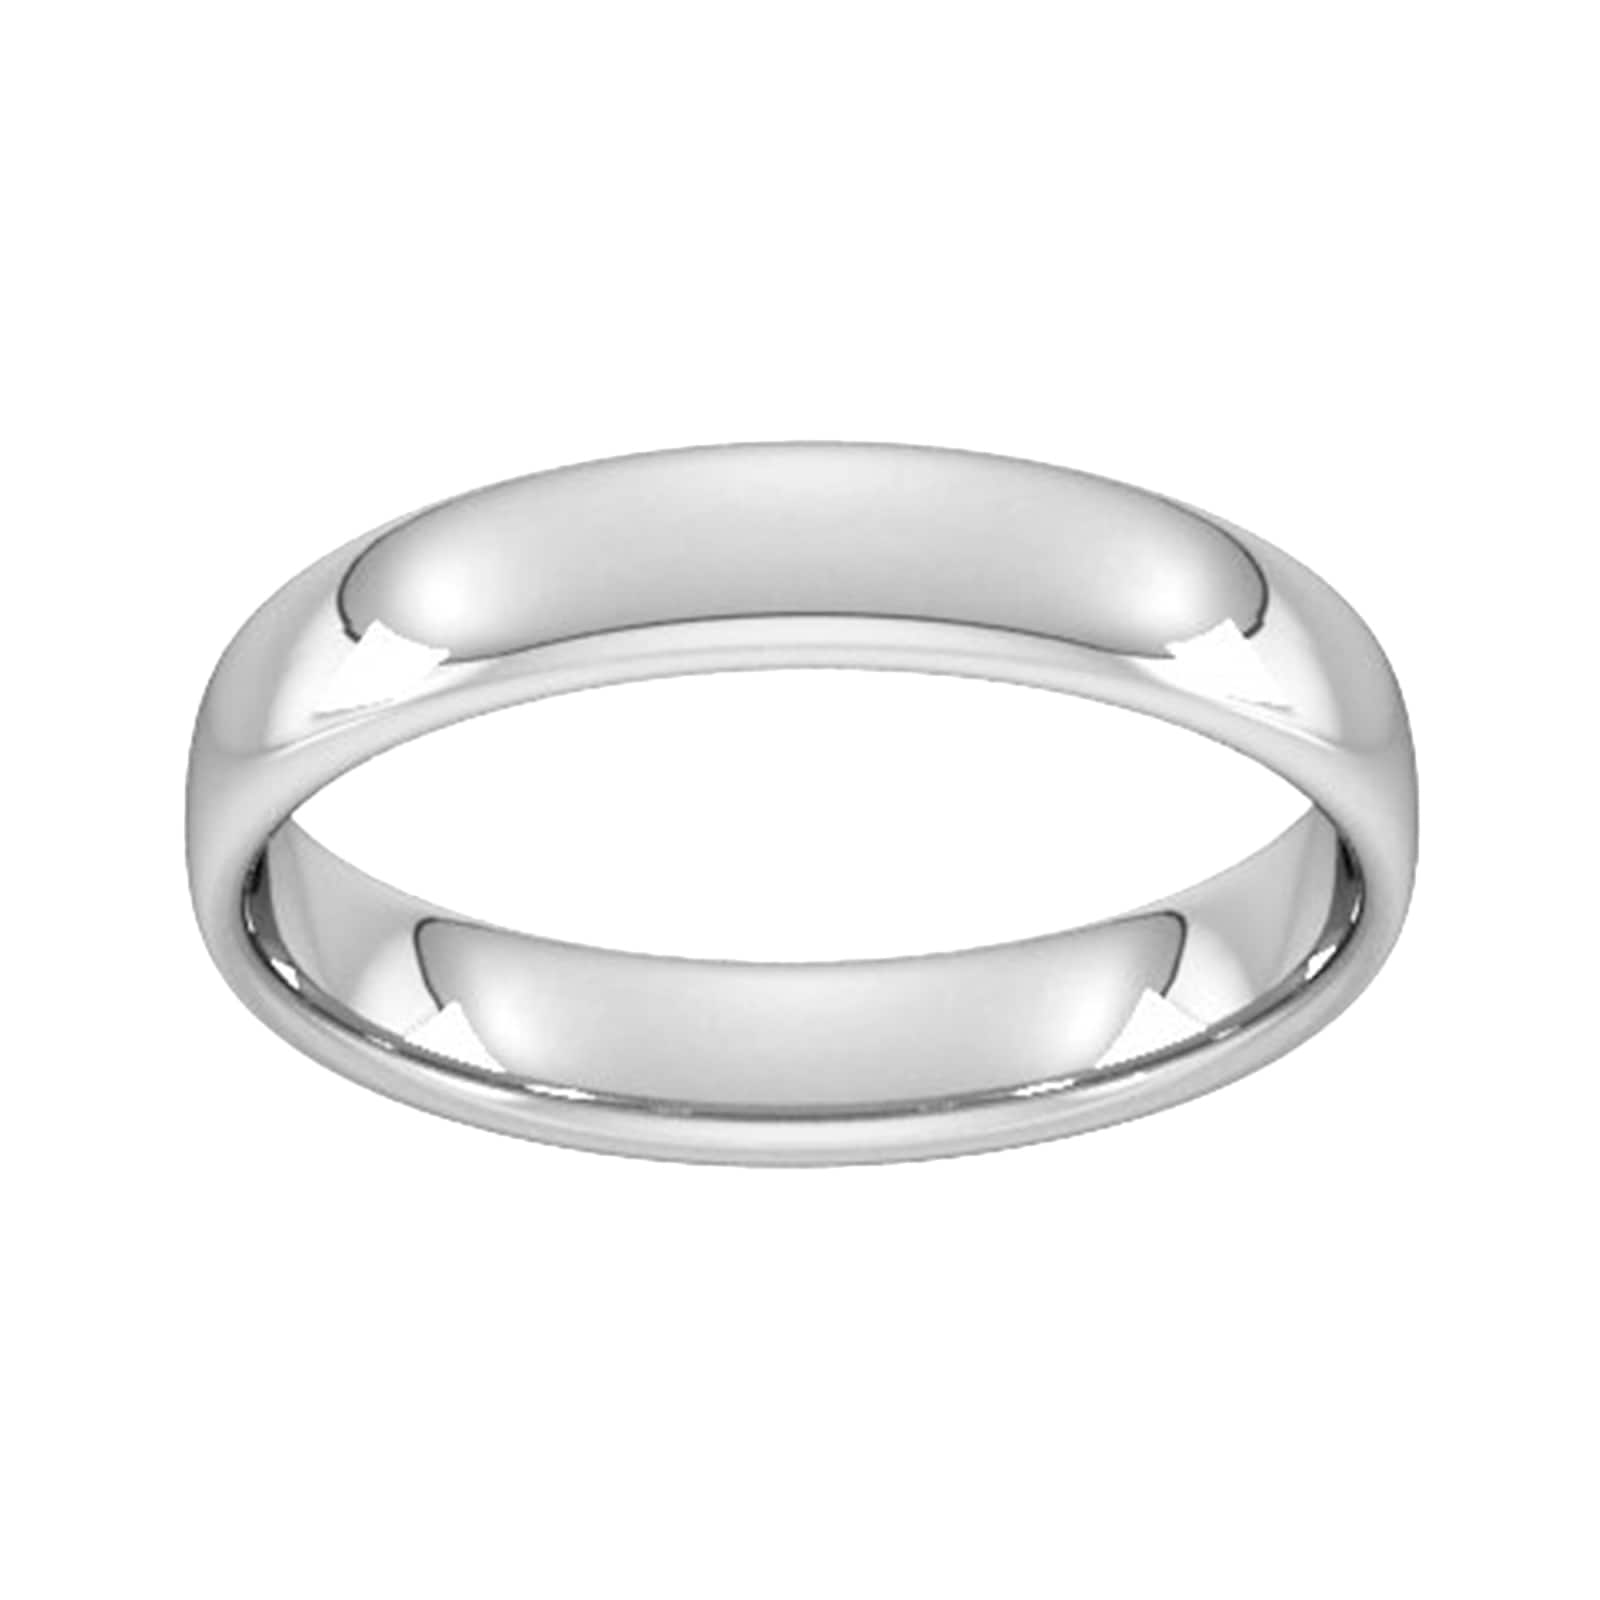 4mm Slight Court Standard Wedding Ring In Sterling Silver - Ring Size S